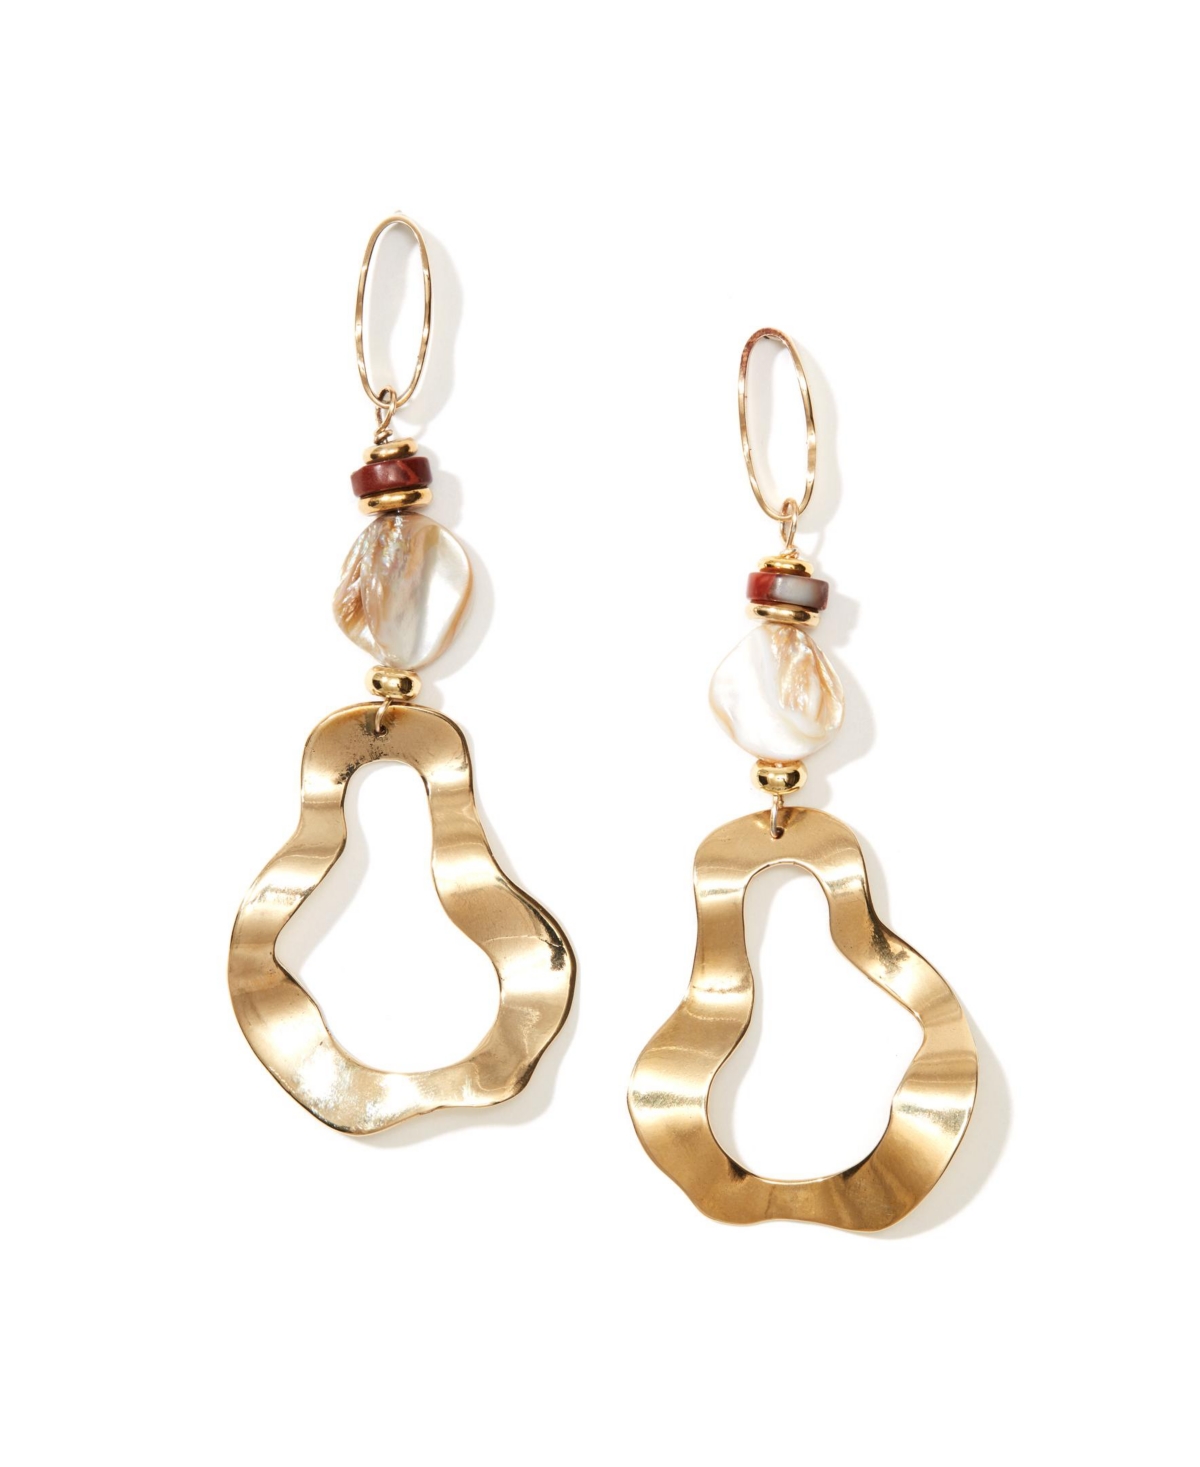 Mother of Imitation Pearl Gemstone Tidal Earrings - Gold Plated